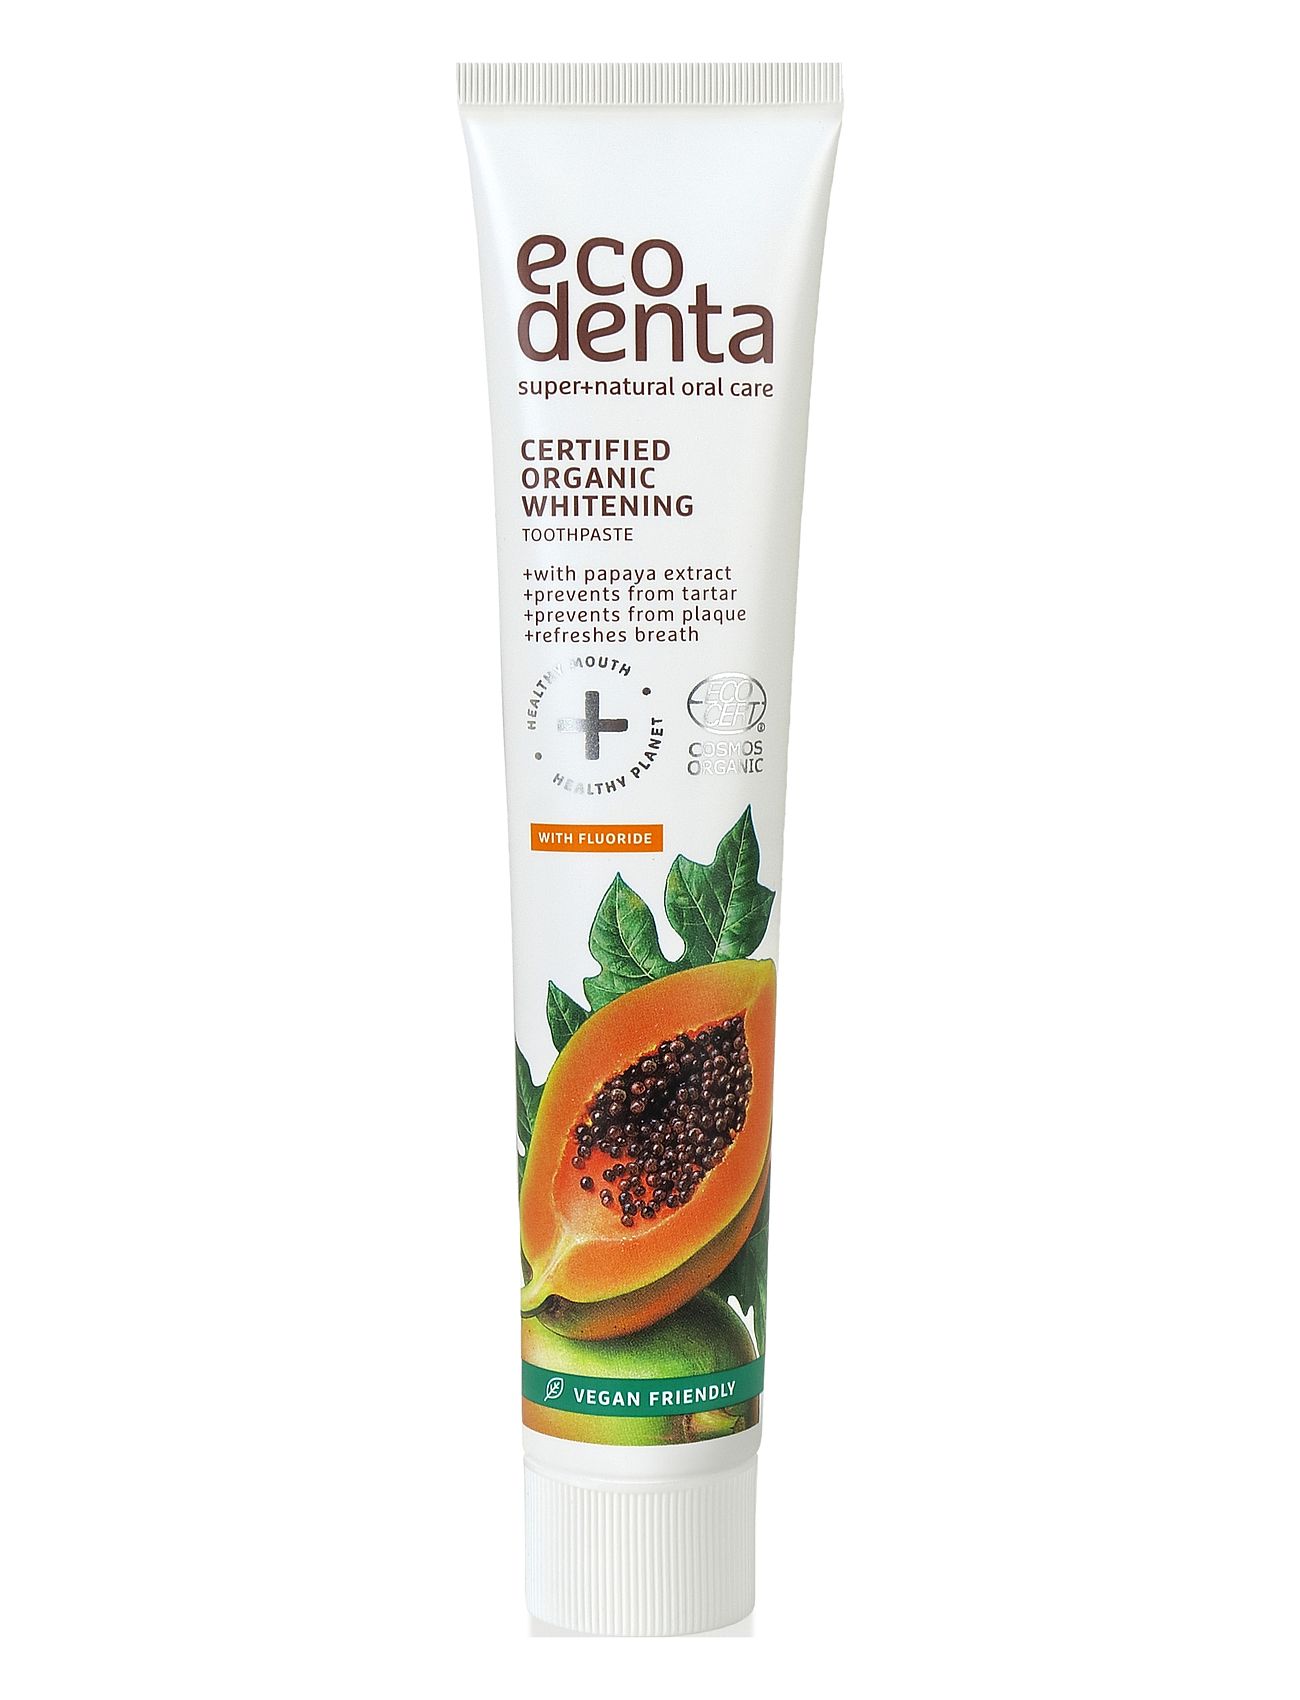 Ecodenta Certified Organic Whitening Toothpaste With Papaya Ectract 75 Ml Beauty Women Home Oral Hygiene Toothpaste Nude Ecodenta